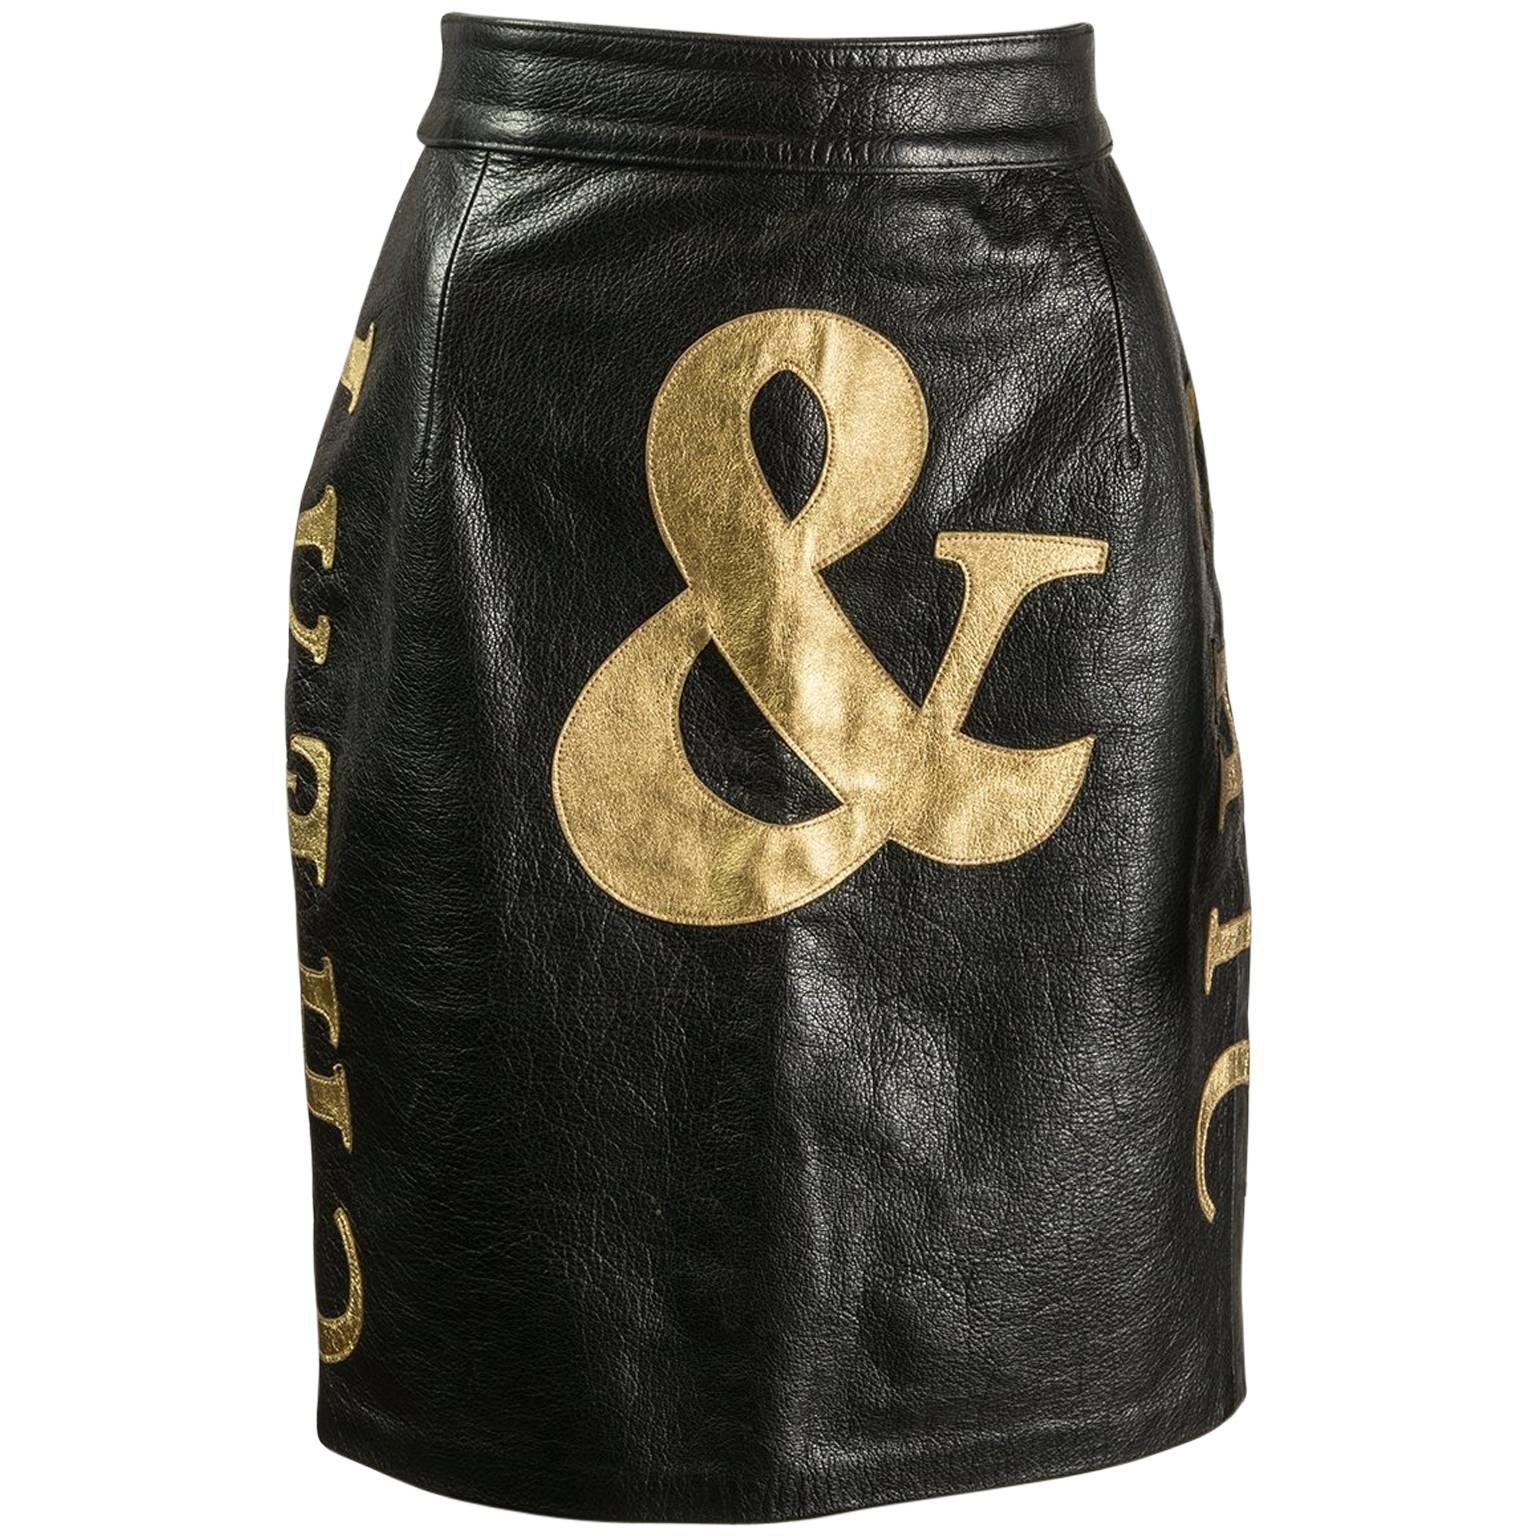 Moschino Cheap and Chic black and gold leather skirt, 1990s For Sale